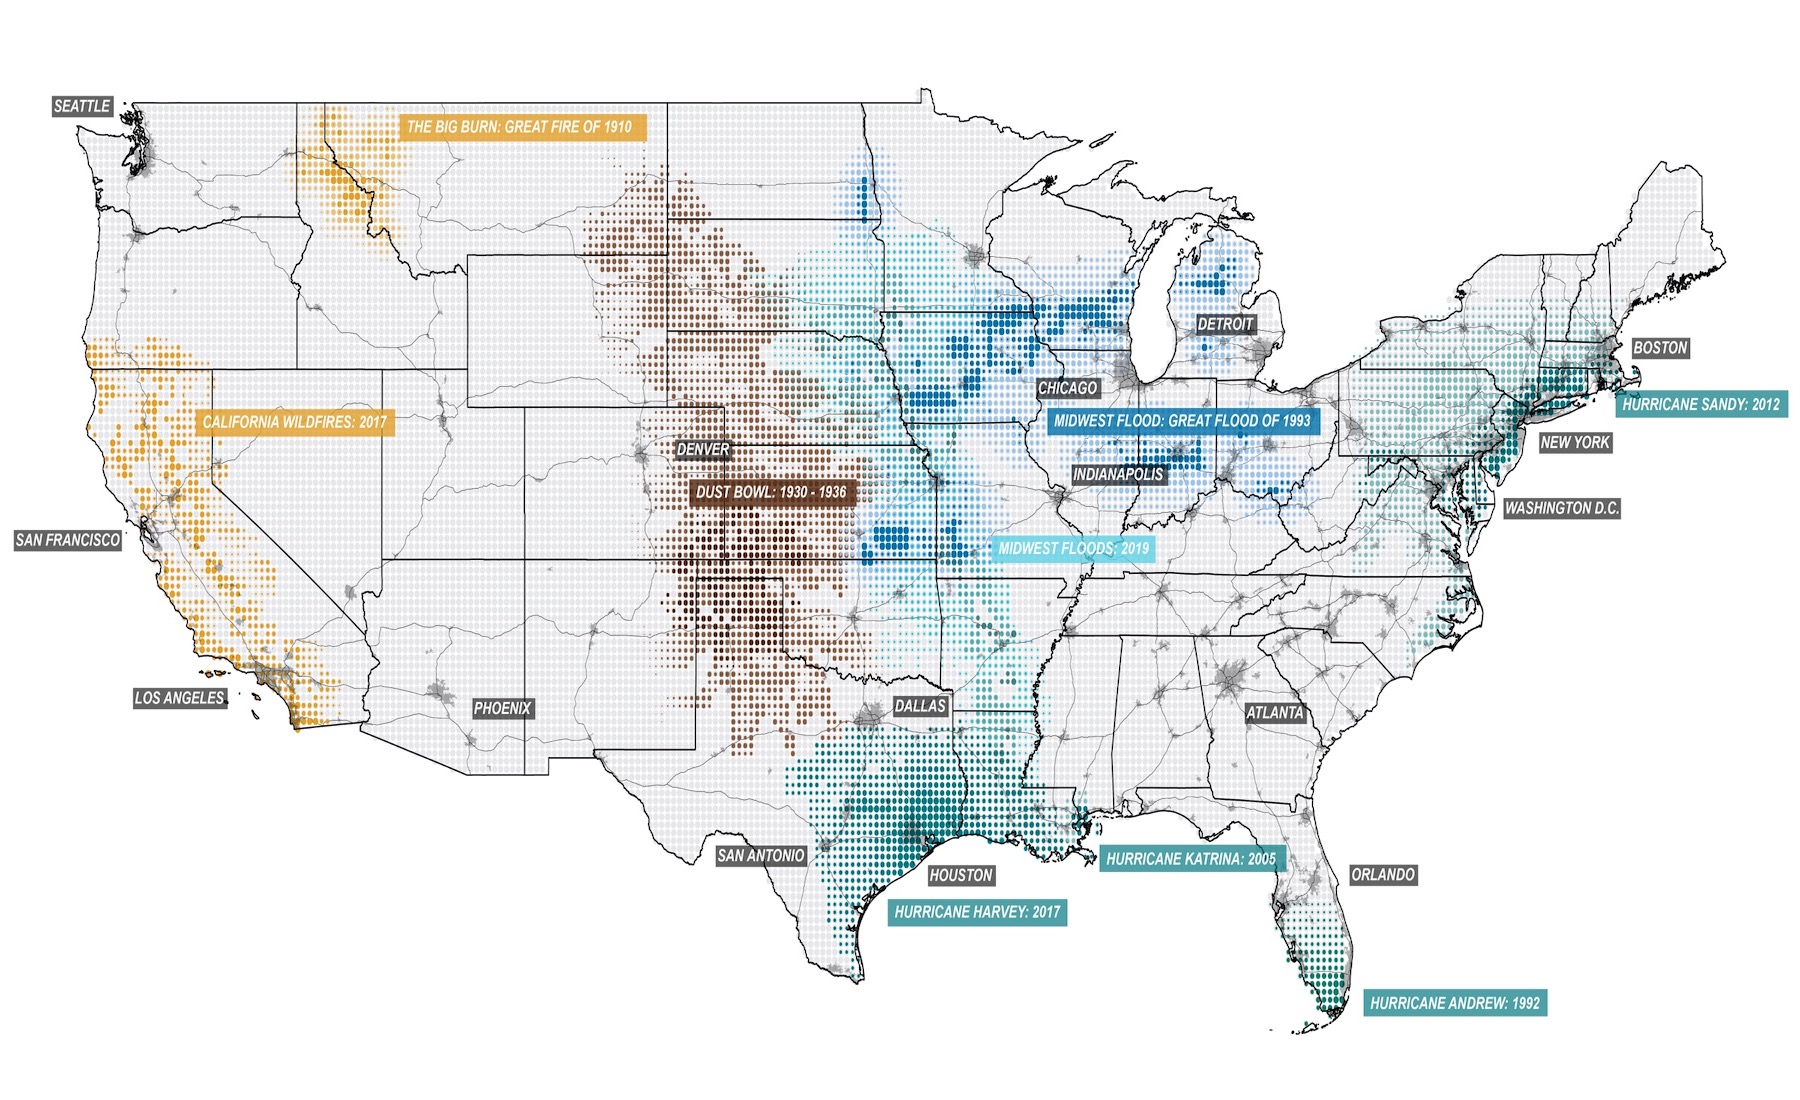 Map showing severe US environmental disasters in recent history from the McHard Center Atlas for a Green New Deal